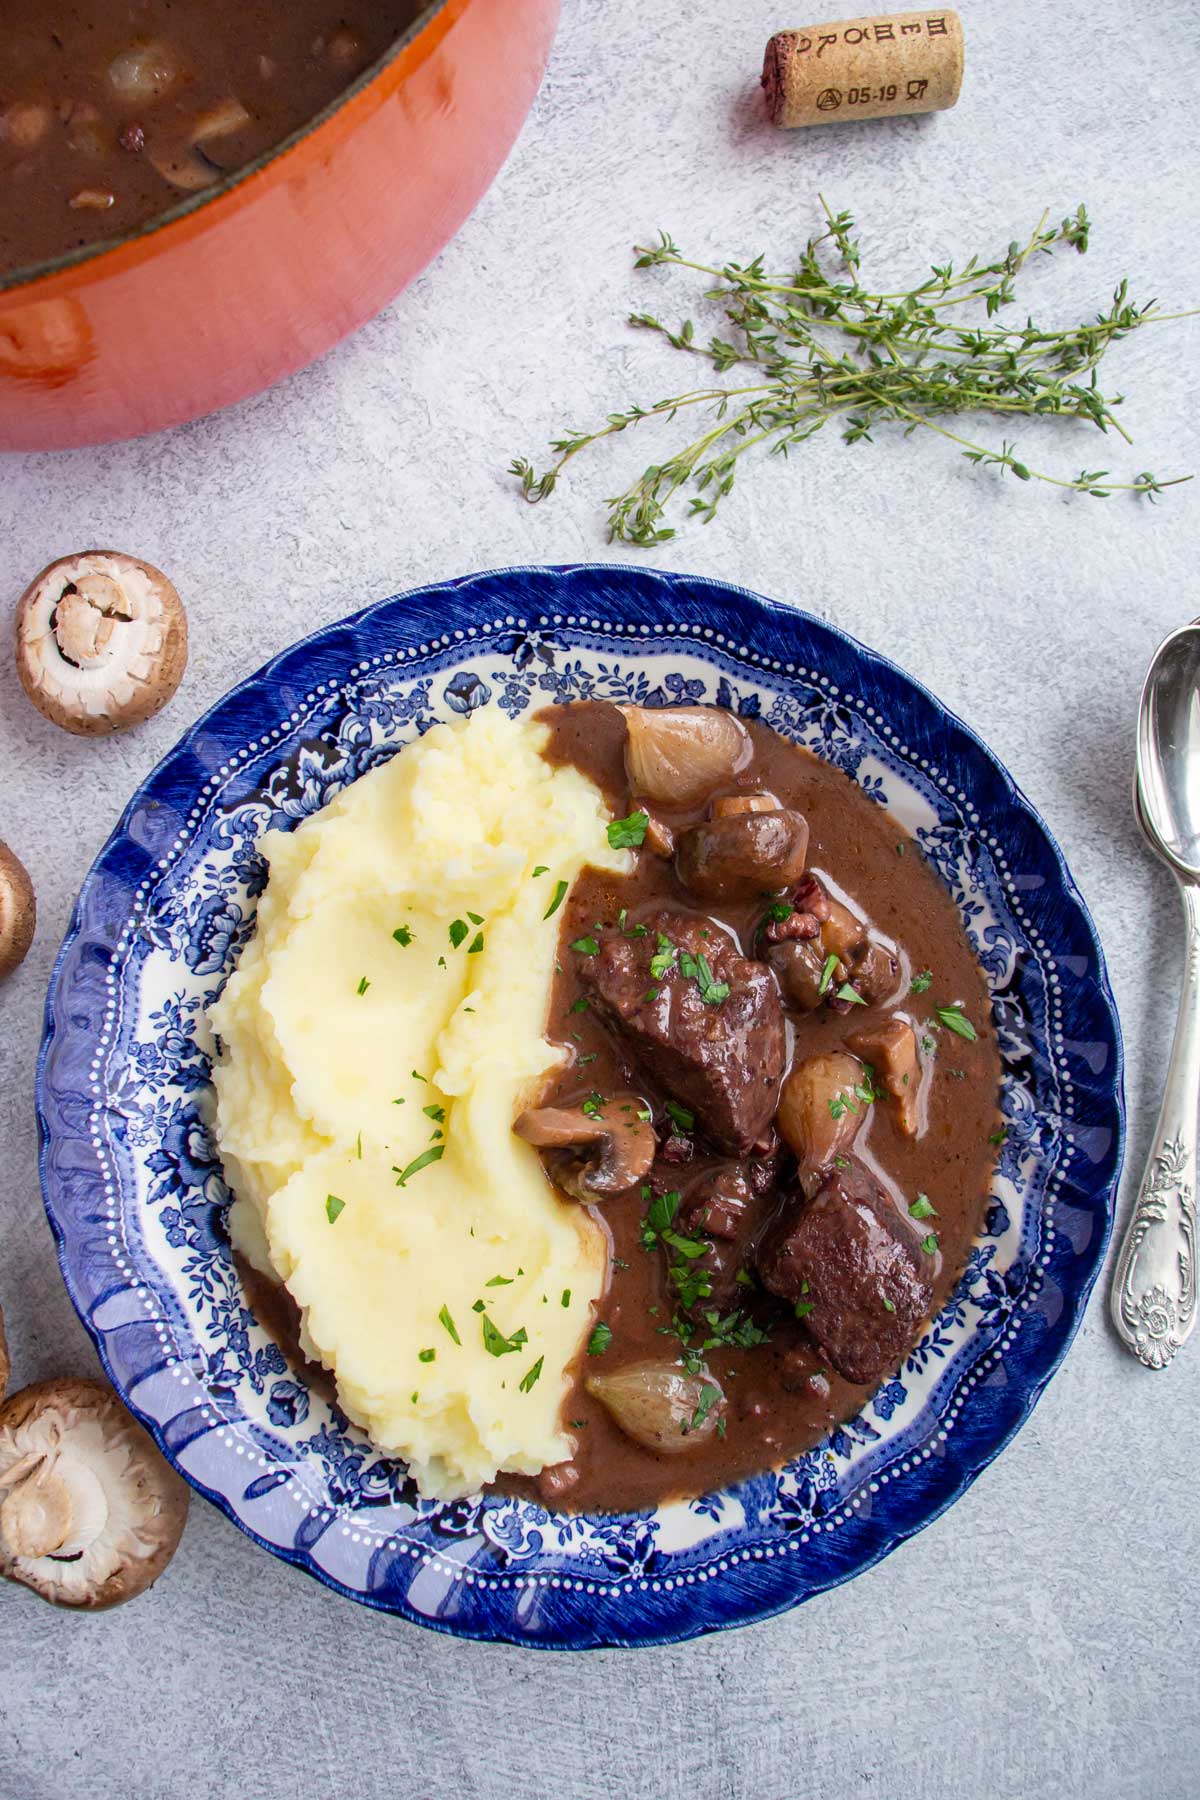 A bowl of beef burgundy stew with mashed potatoes, next to mushrooms and springs of thyme.